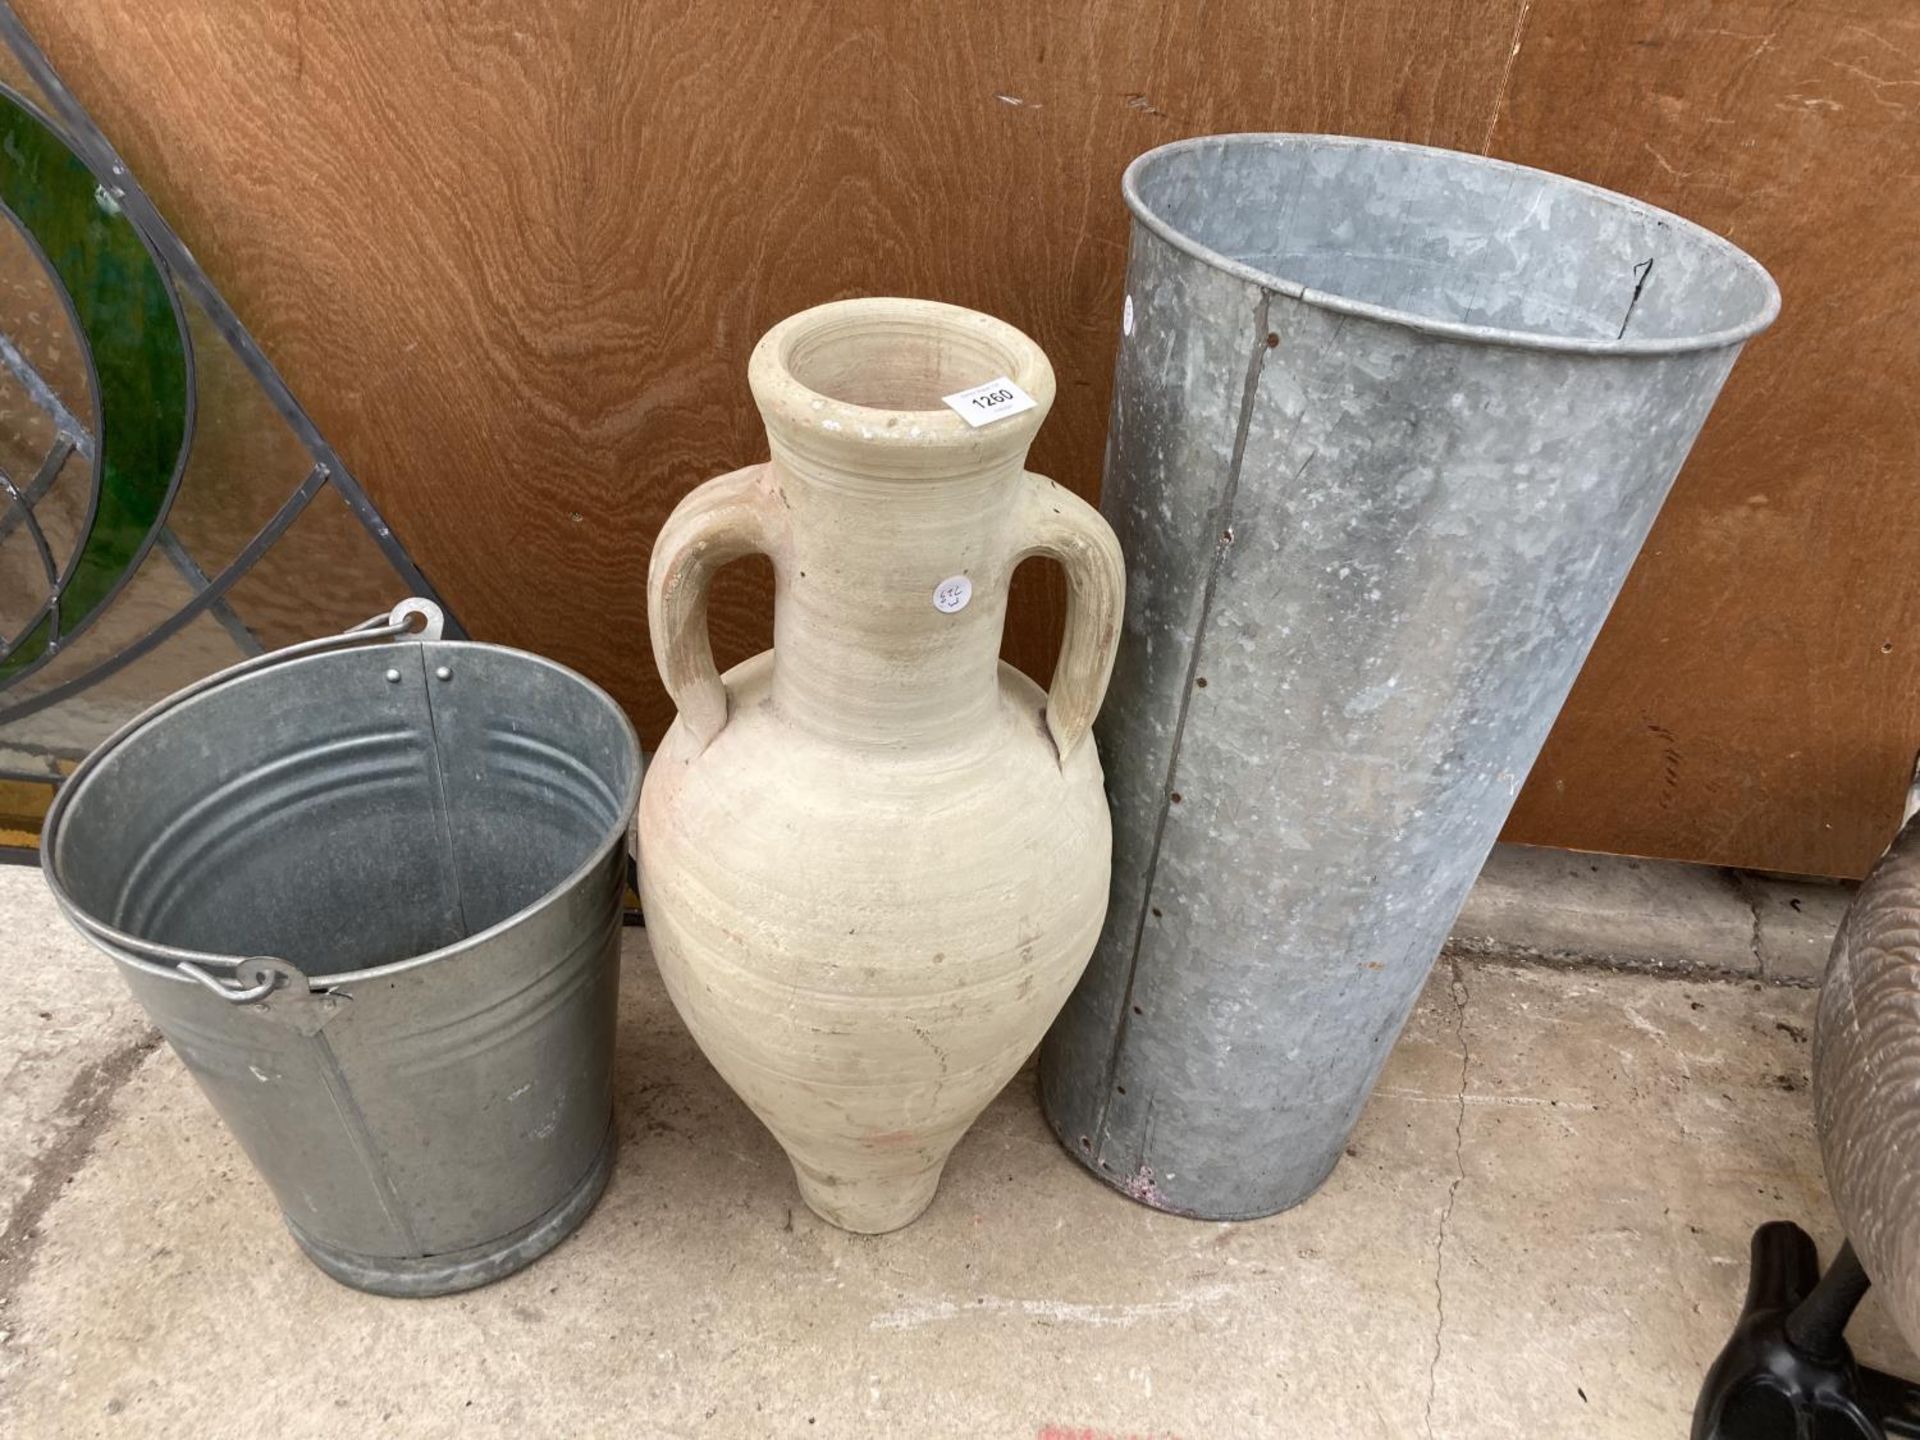 TWO GALAVANISED BUCKETS AND A CERAMIC URN VASE